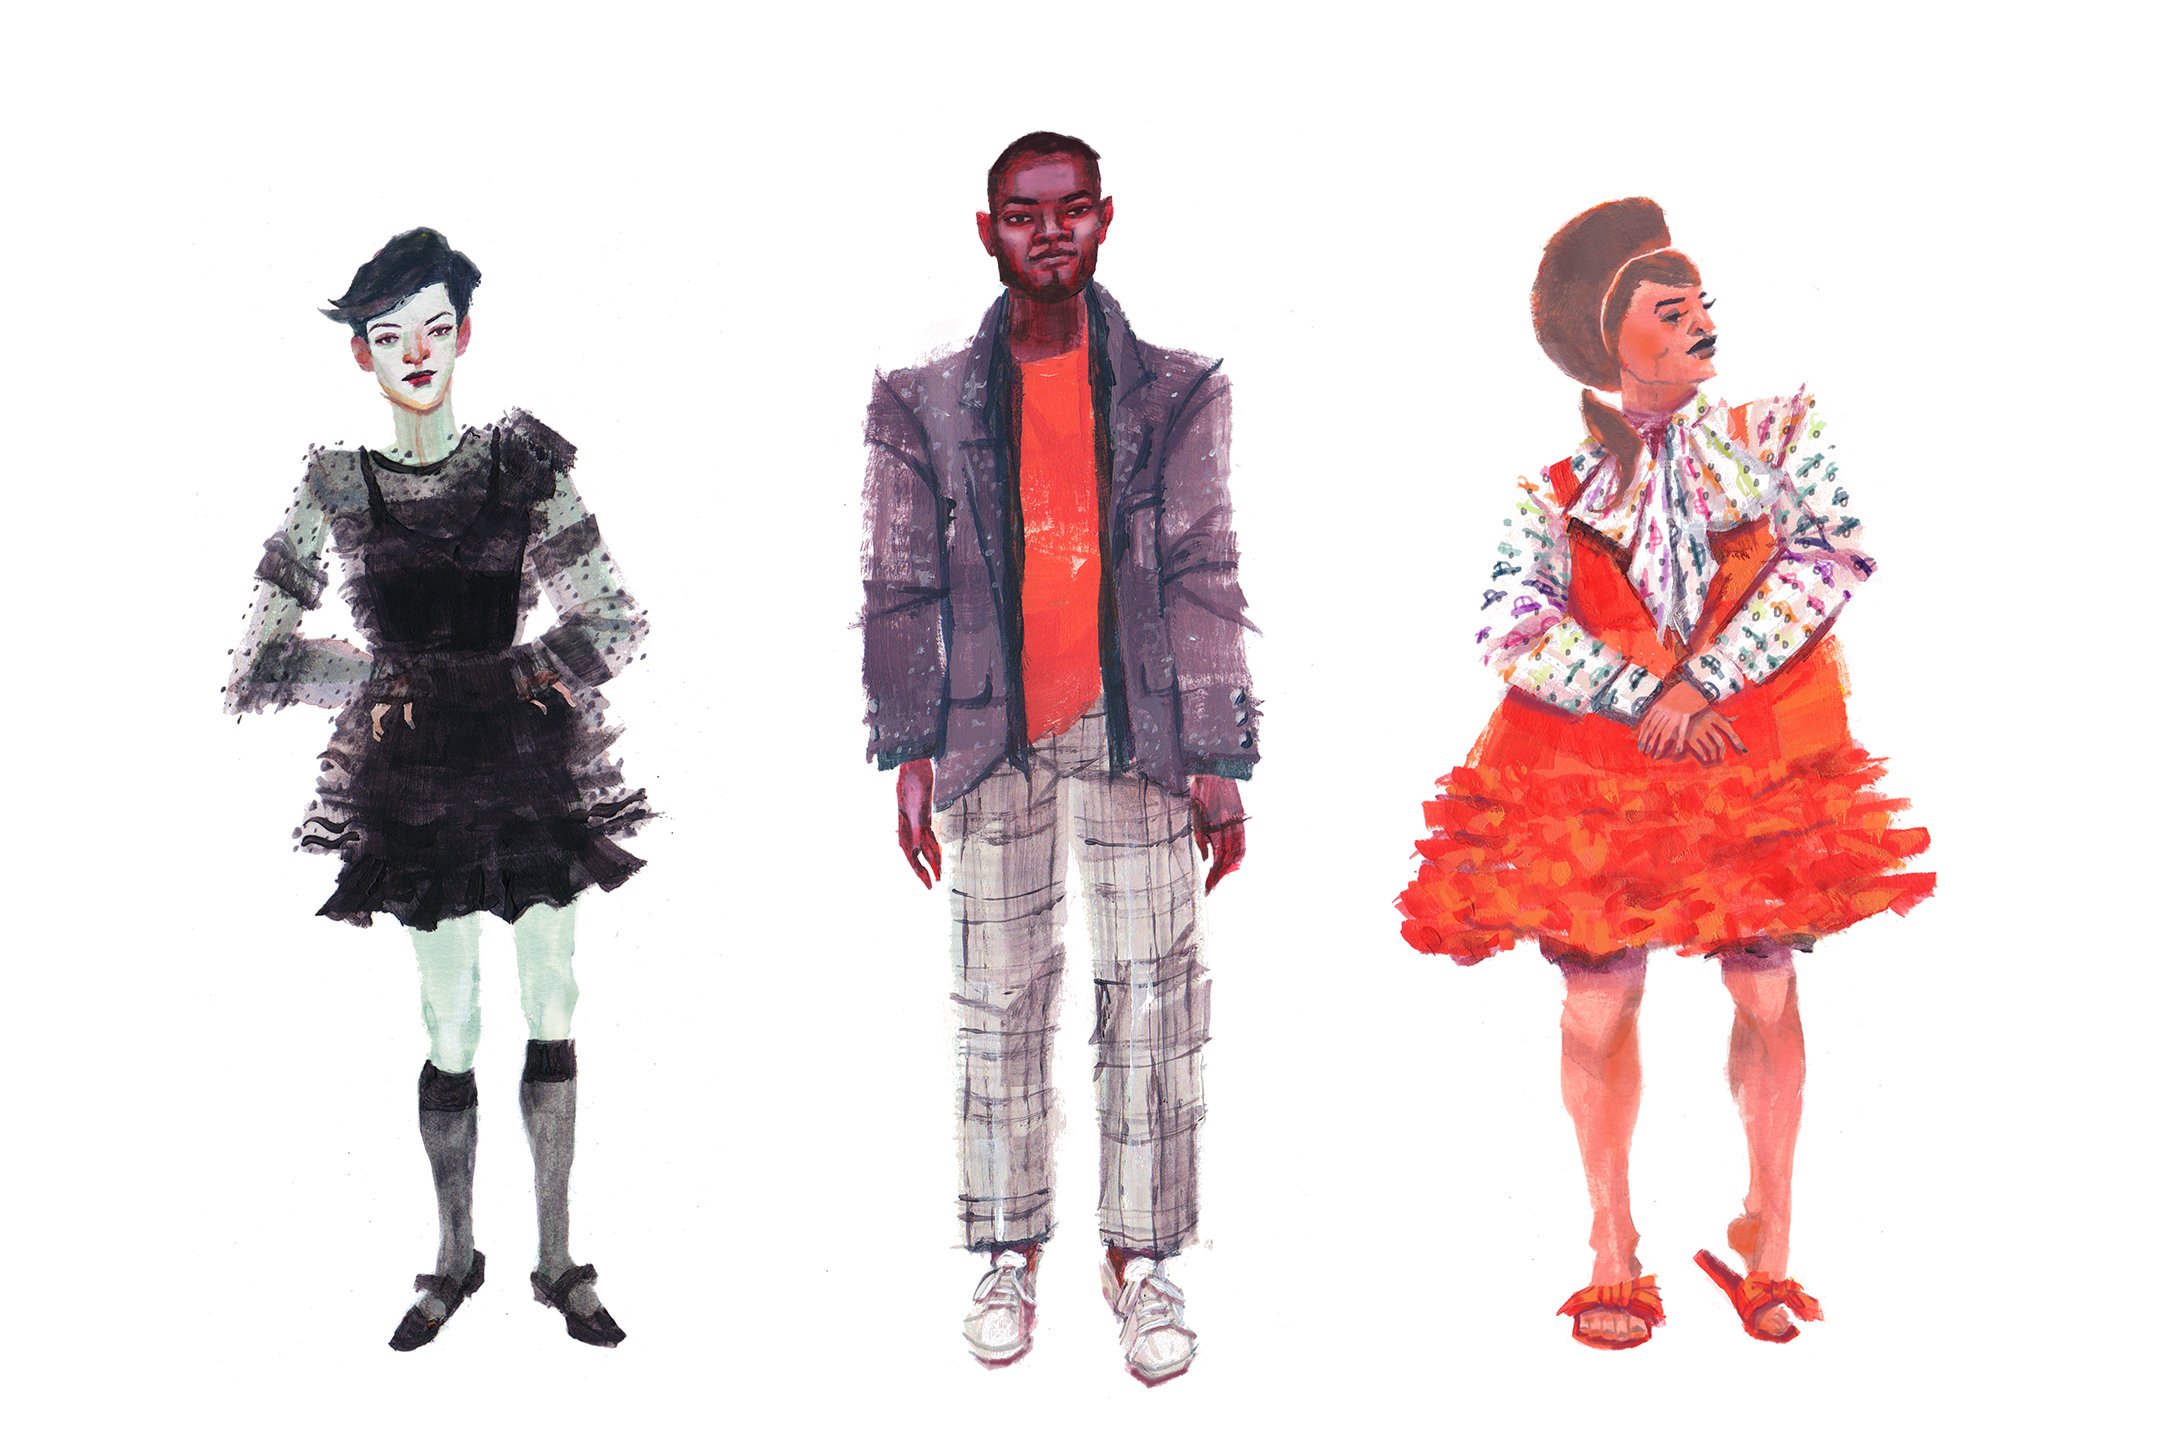  Week 4 Paper Dolls - Halloween/Fall Party theme. Dresses from Dice Kayek’s Spring Summer 2021 collection &amp; suit from Gabriela Hearst’s Fall 2020 menswear collection 